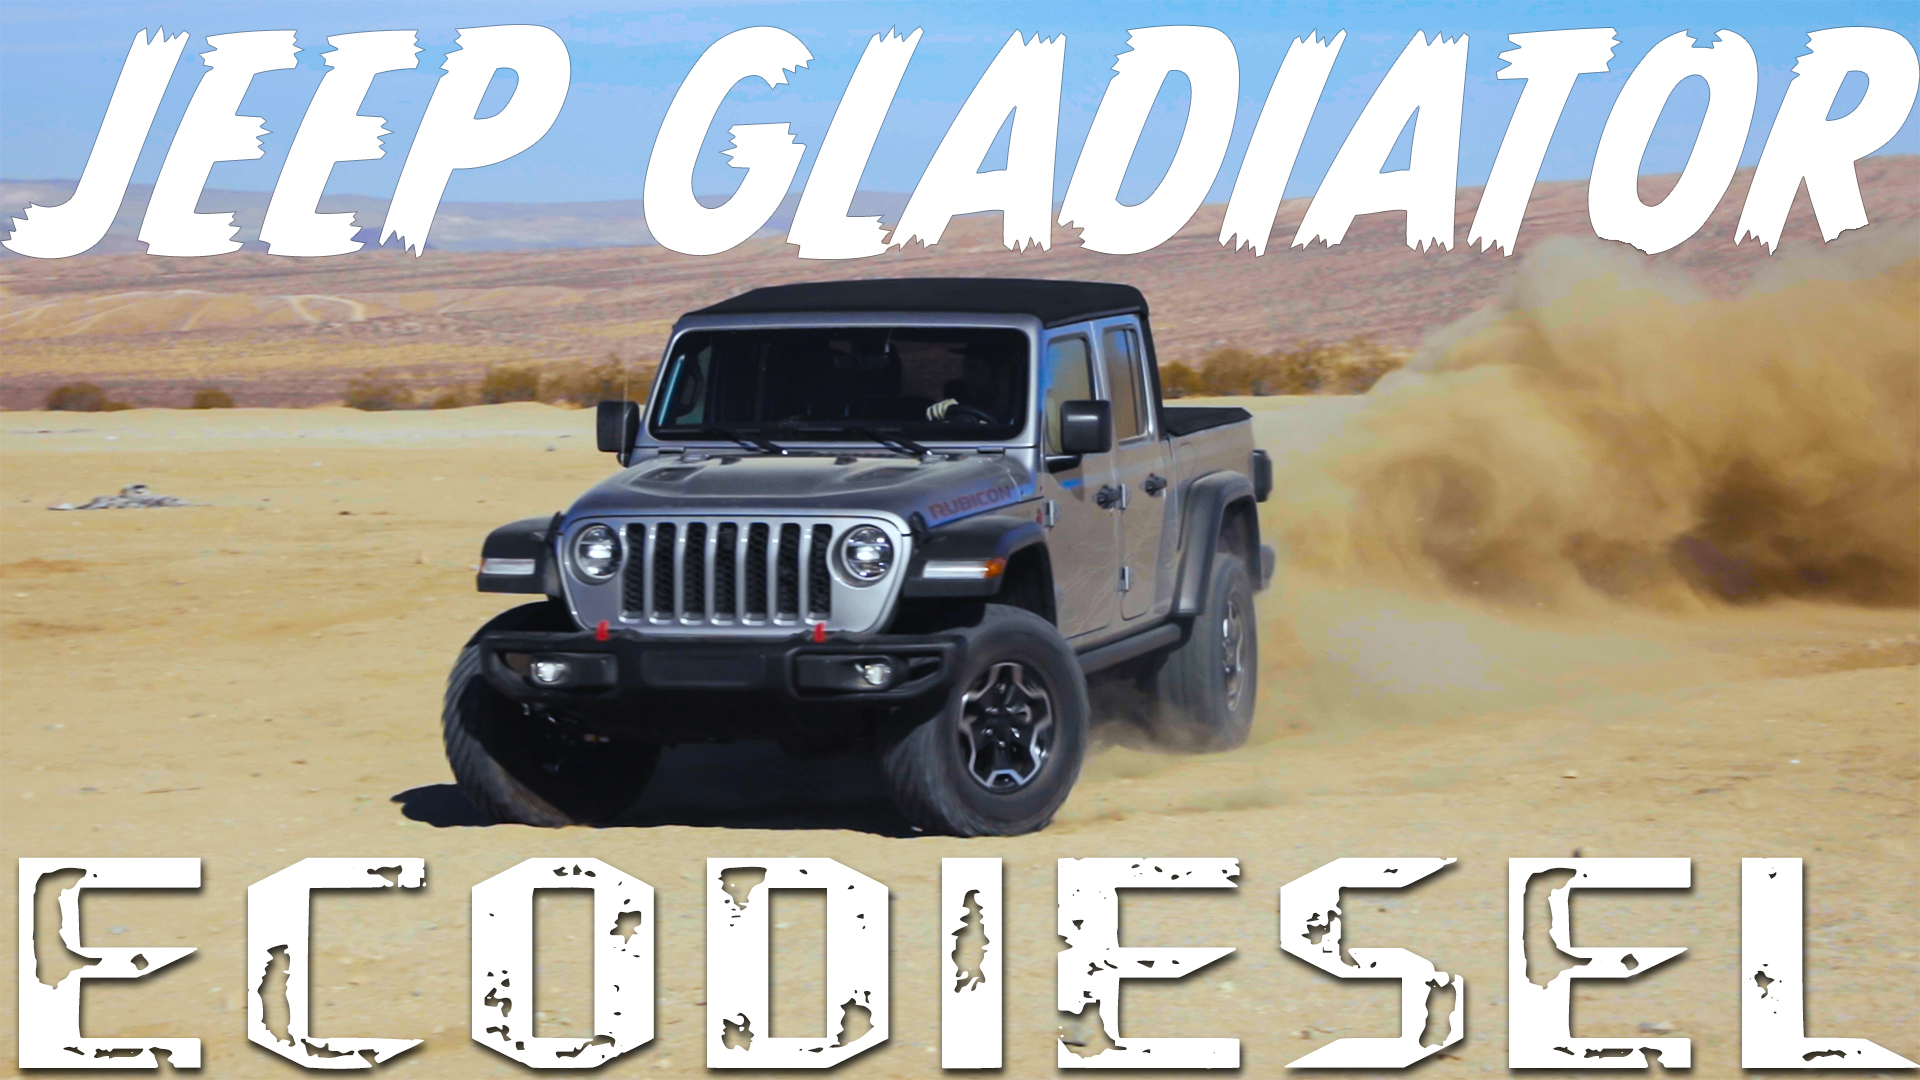 Jeep Gladiator Rubicon EcoDiesel: Oil-burning off-road excellence